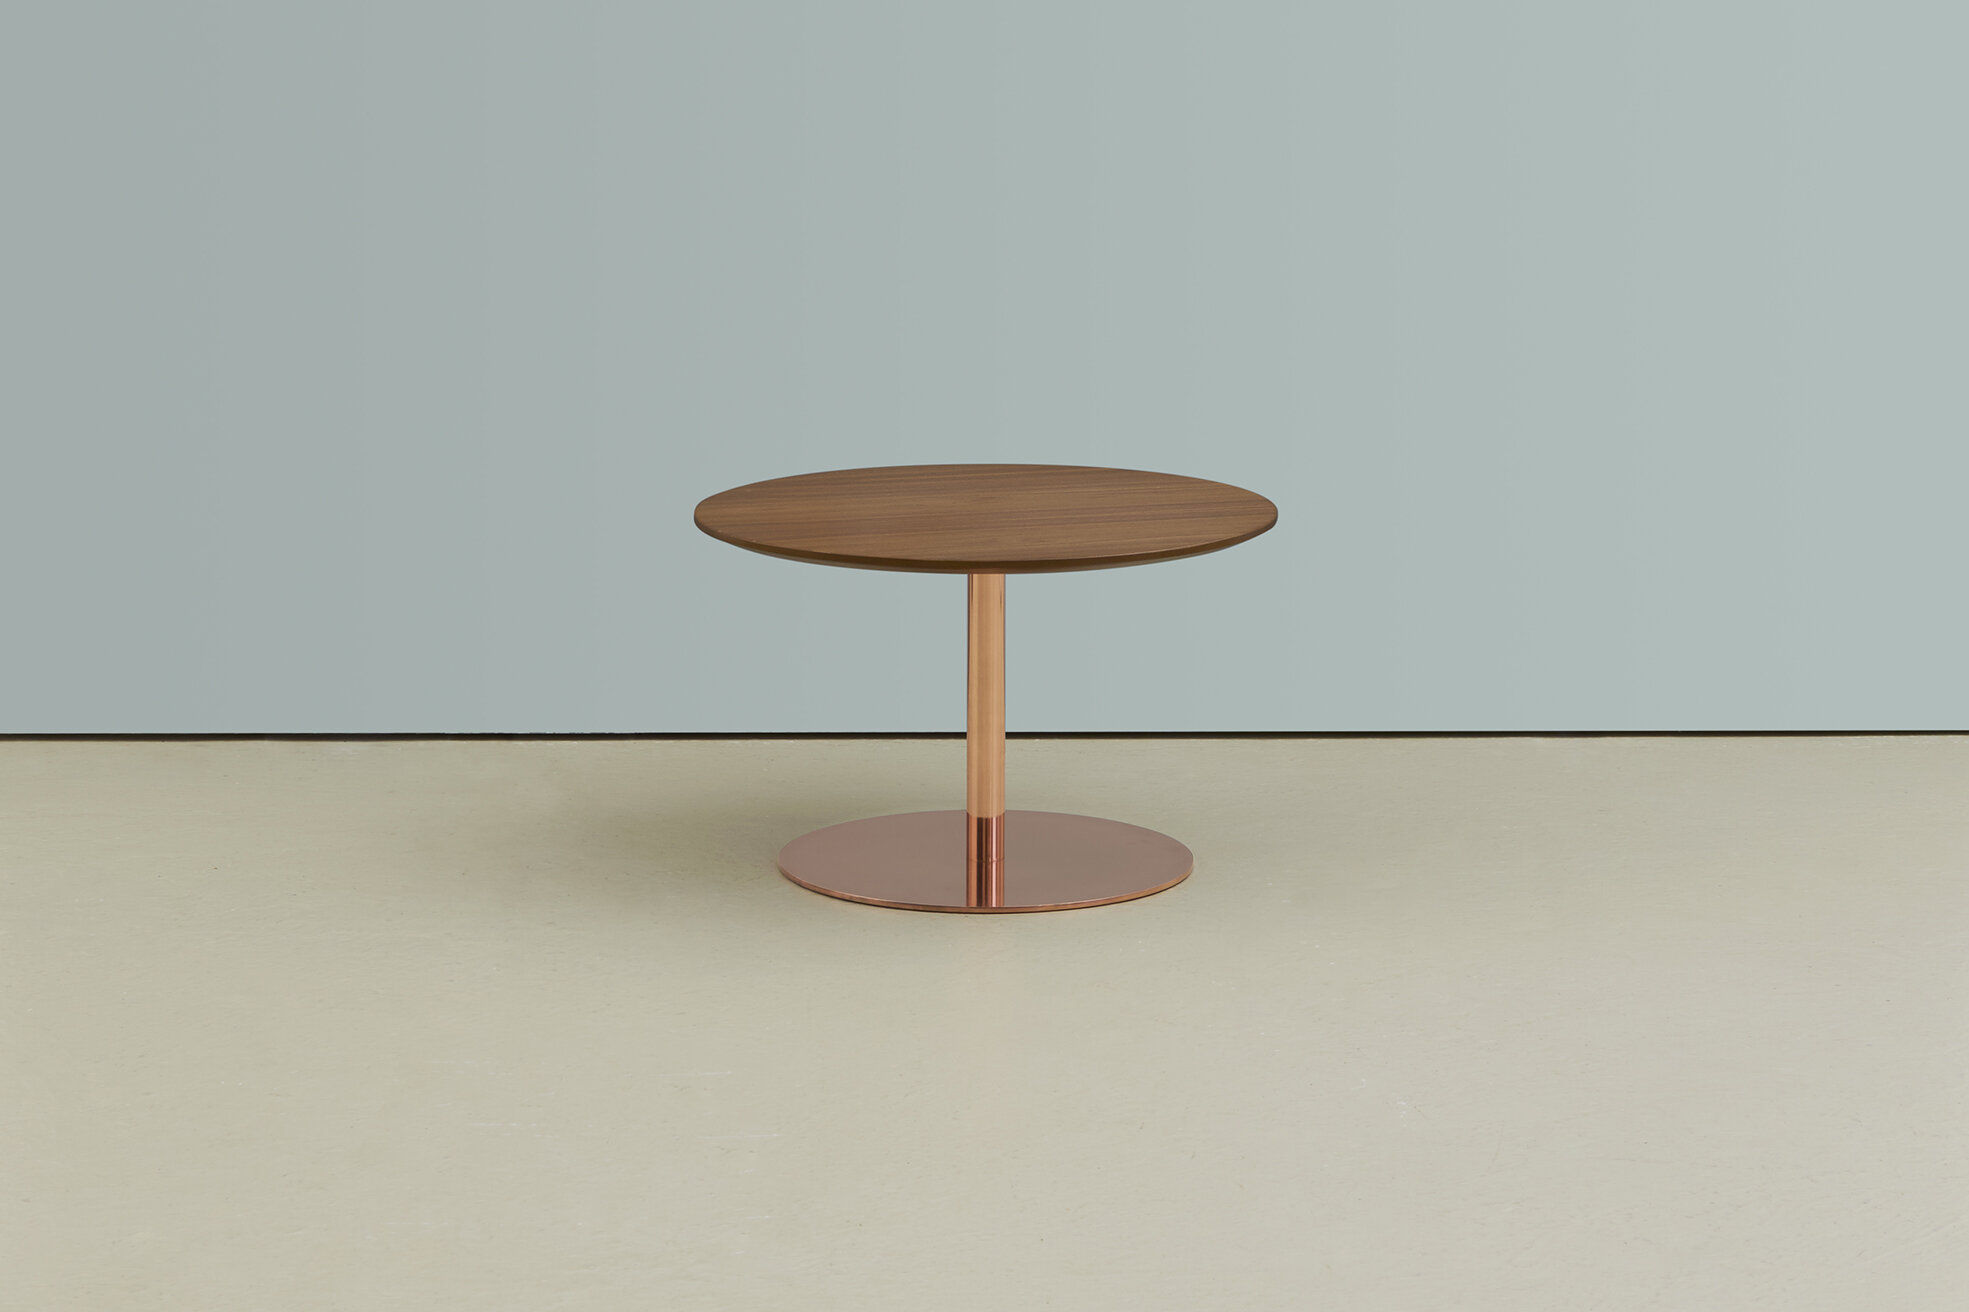 hm20e (polished copper base, walnut top) (1) (low res).jpg